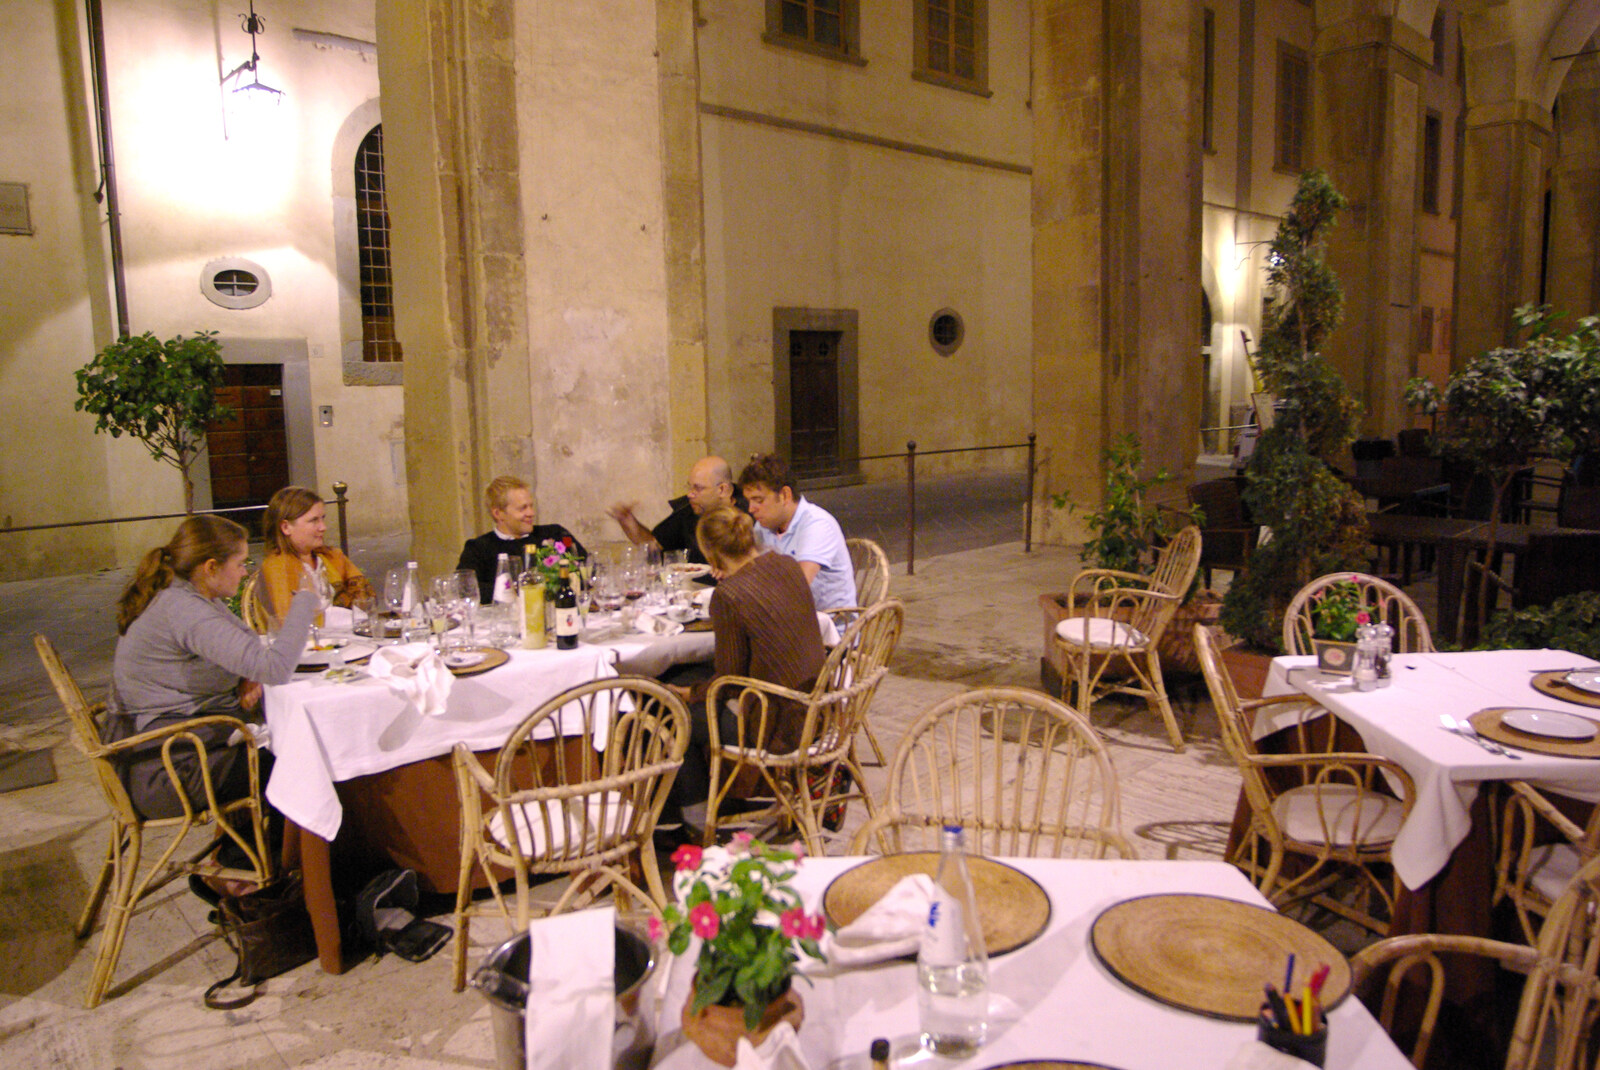 The group around the table from Tenuta Il Palazzo in Arezzo, Tuscany, Italy - 22nd July 2008